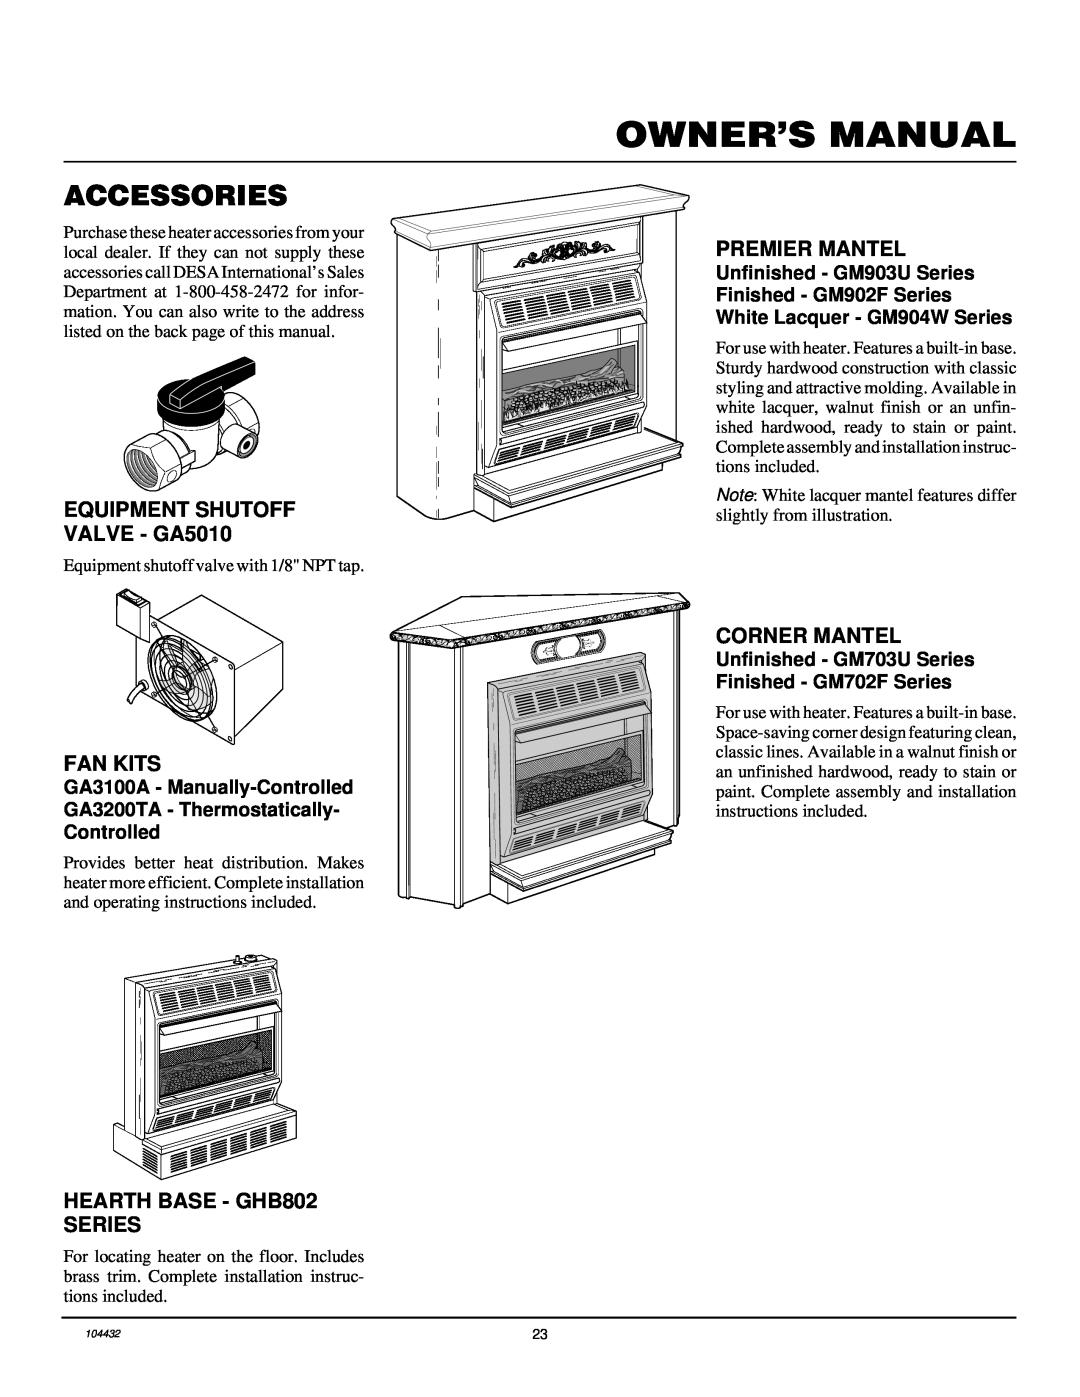 Vanguard Heating VMH3000TP Accessories, Owner’S Manual, GA3100A - Manually-Controlled, Unfinished - GM903U Series 